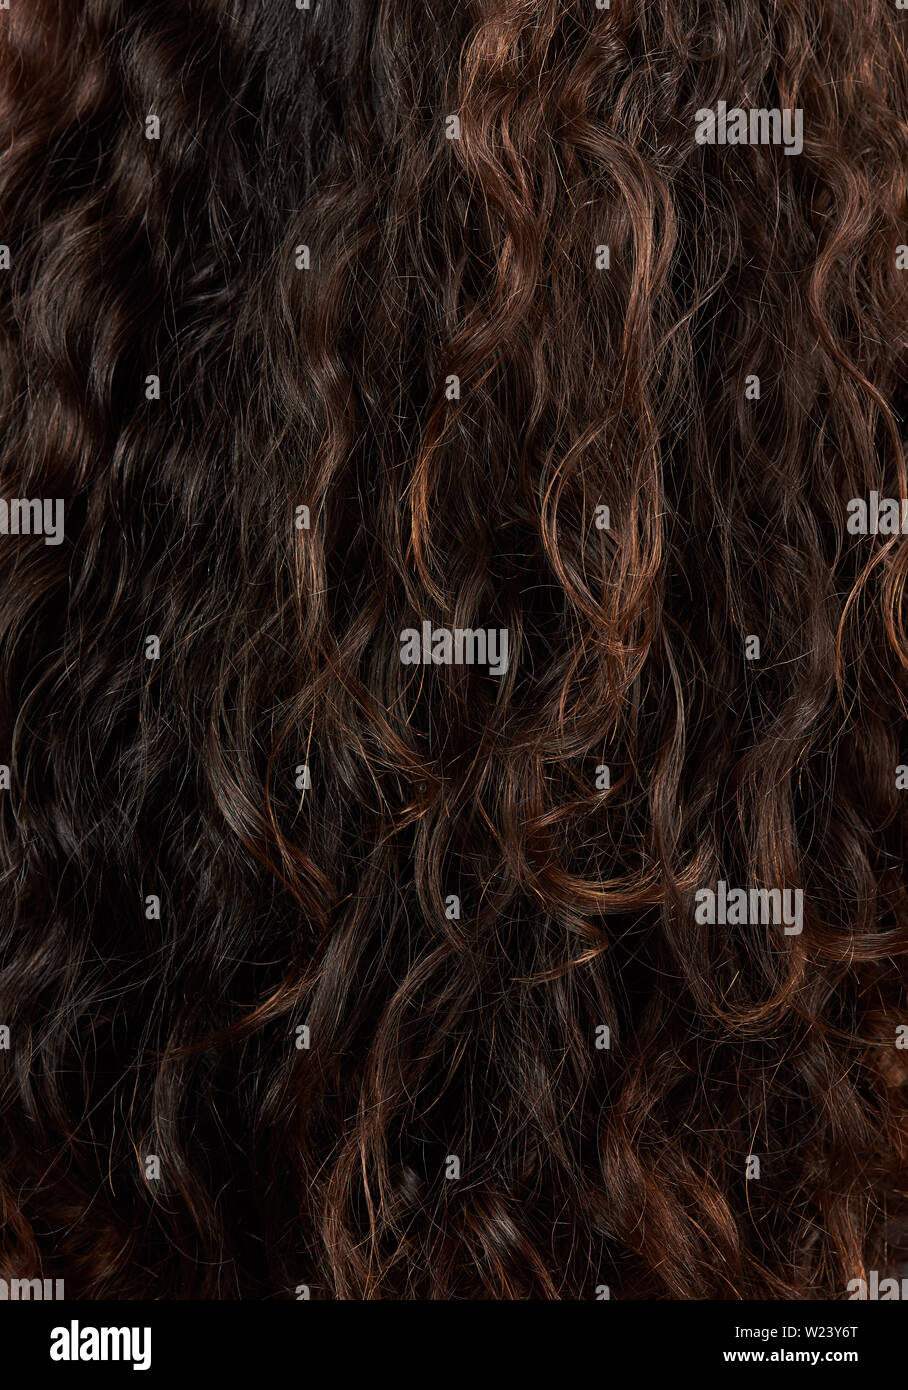 Brown natural woman  curly hair background. Wavy hairstyle Stock Photo